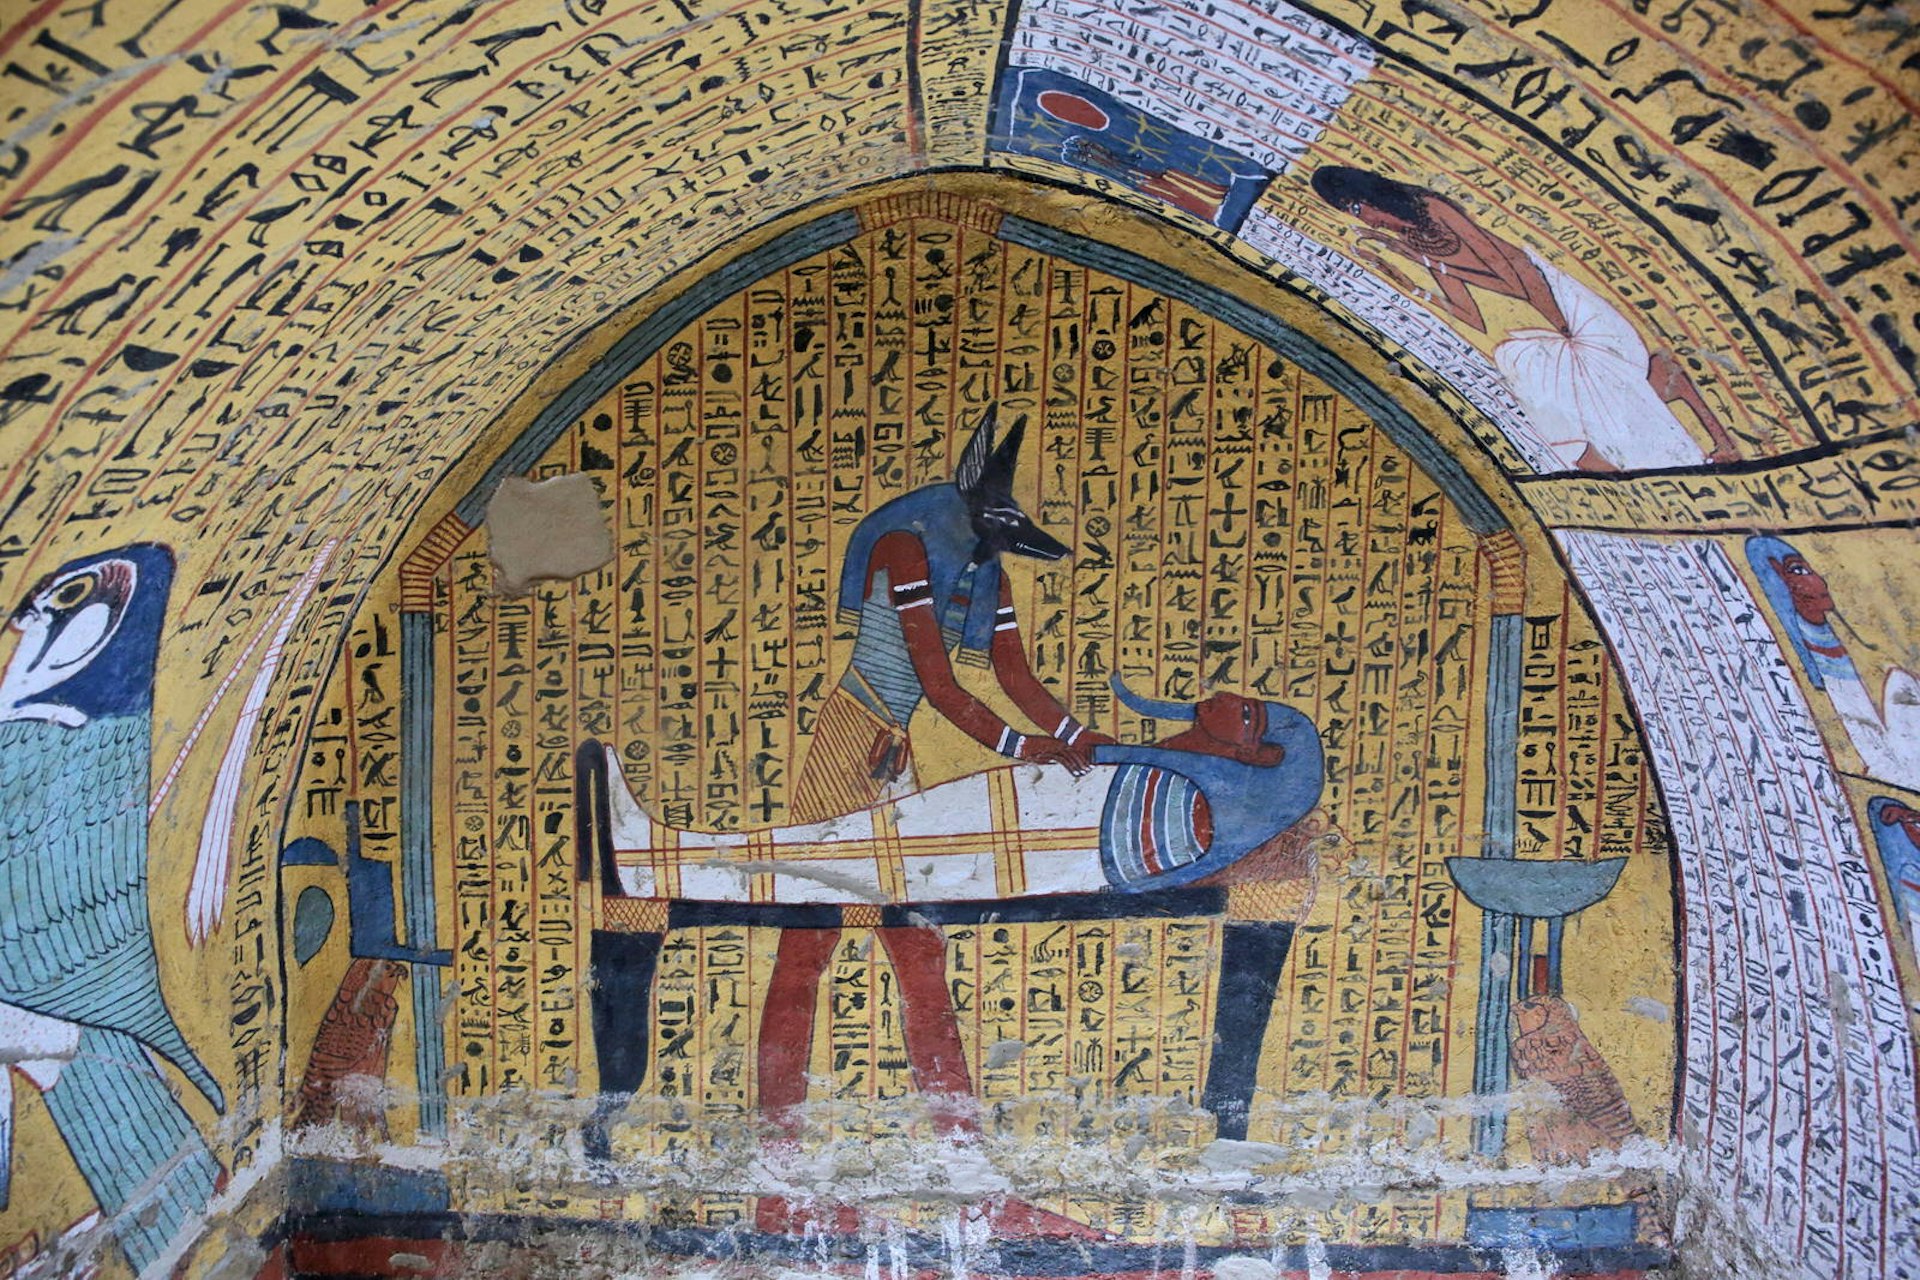 Wall painting and decoration of the tomb: ancient Egyptian gods and hieroglyphs in wall painting. Image by Vladimir Melnik / Shutterstock